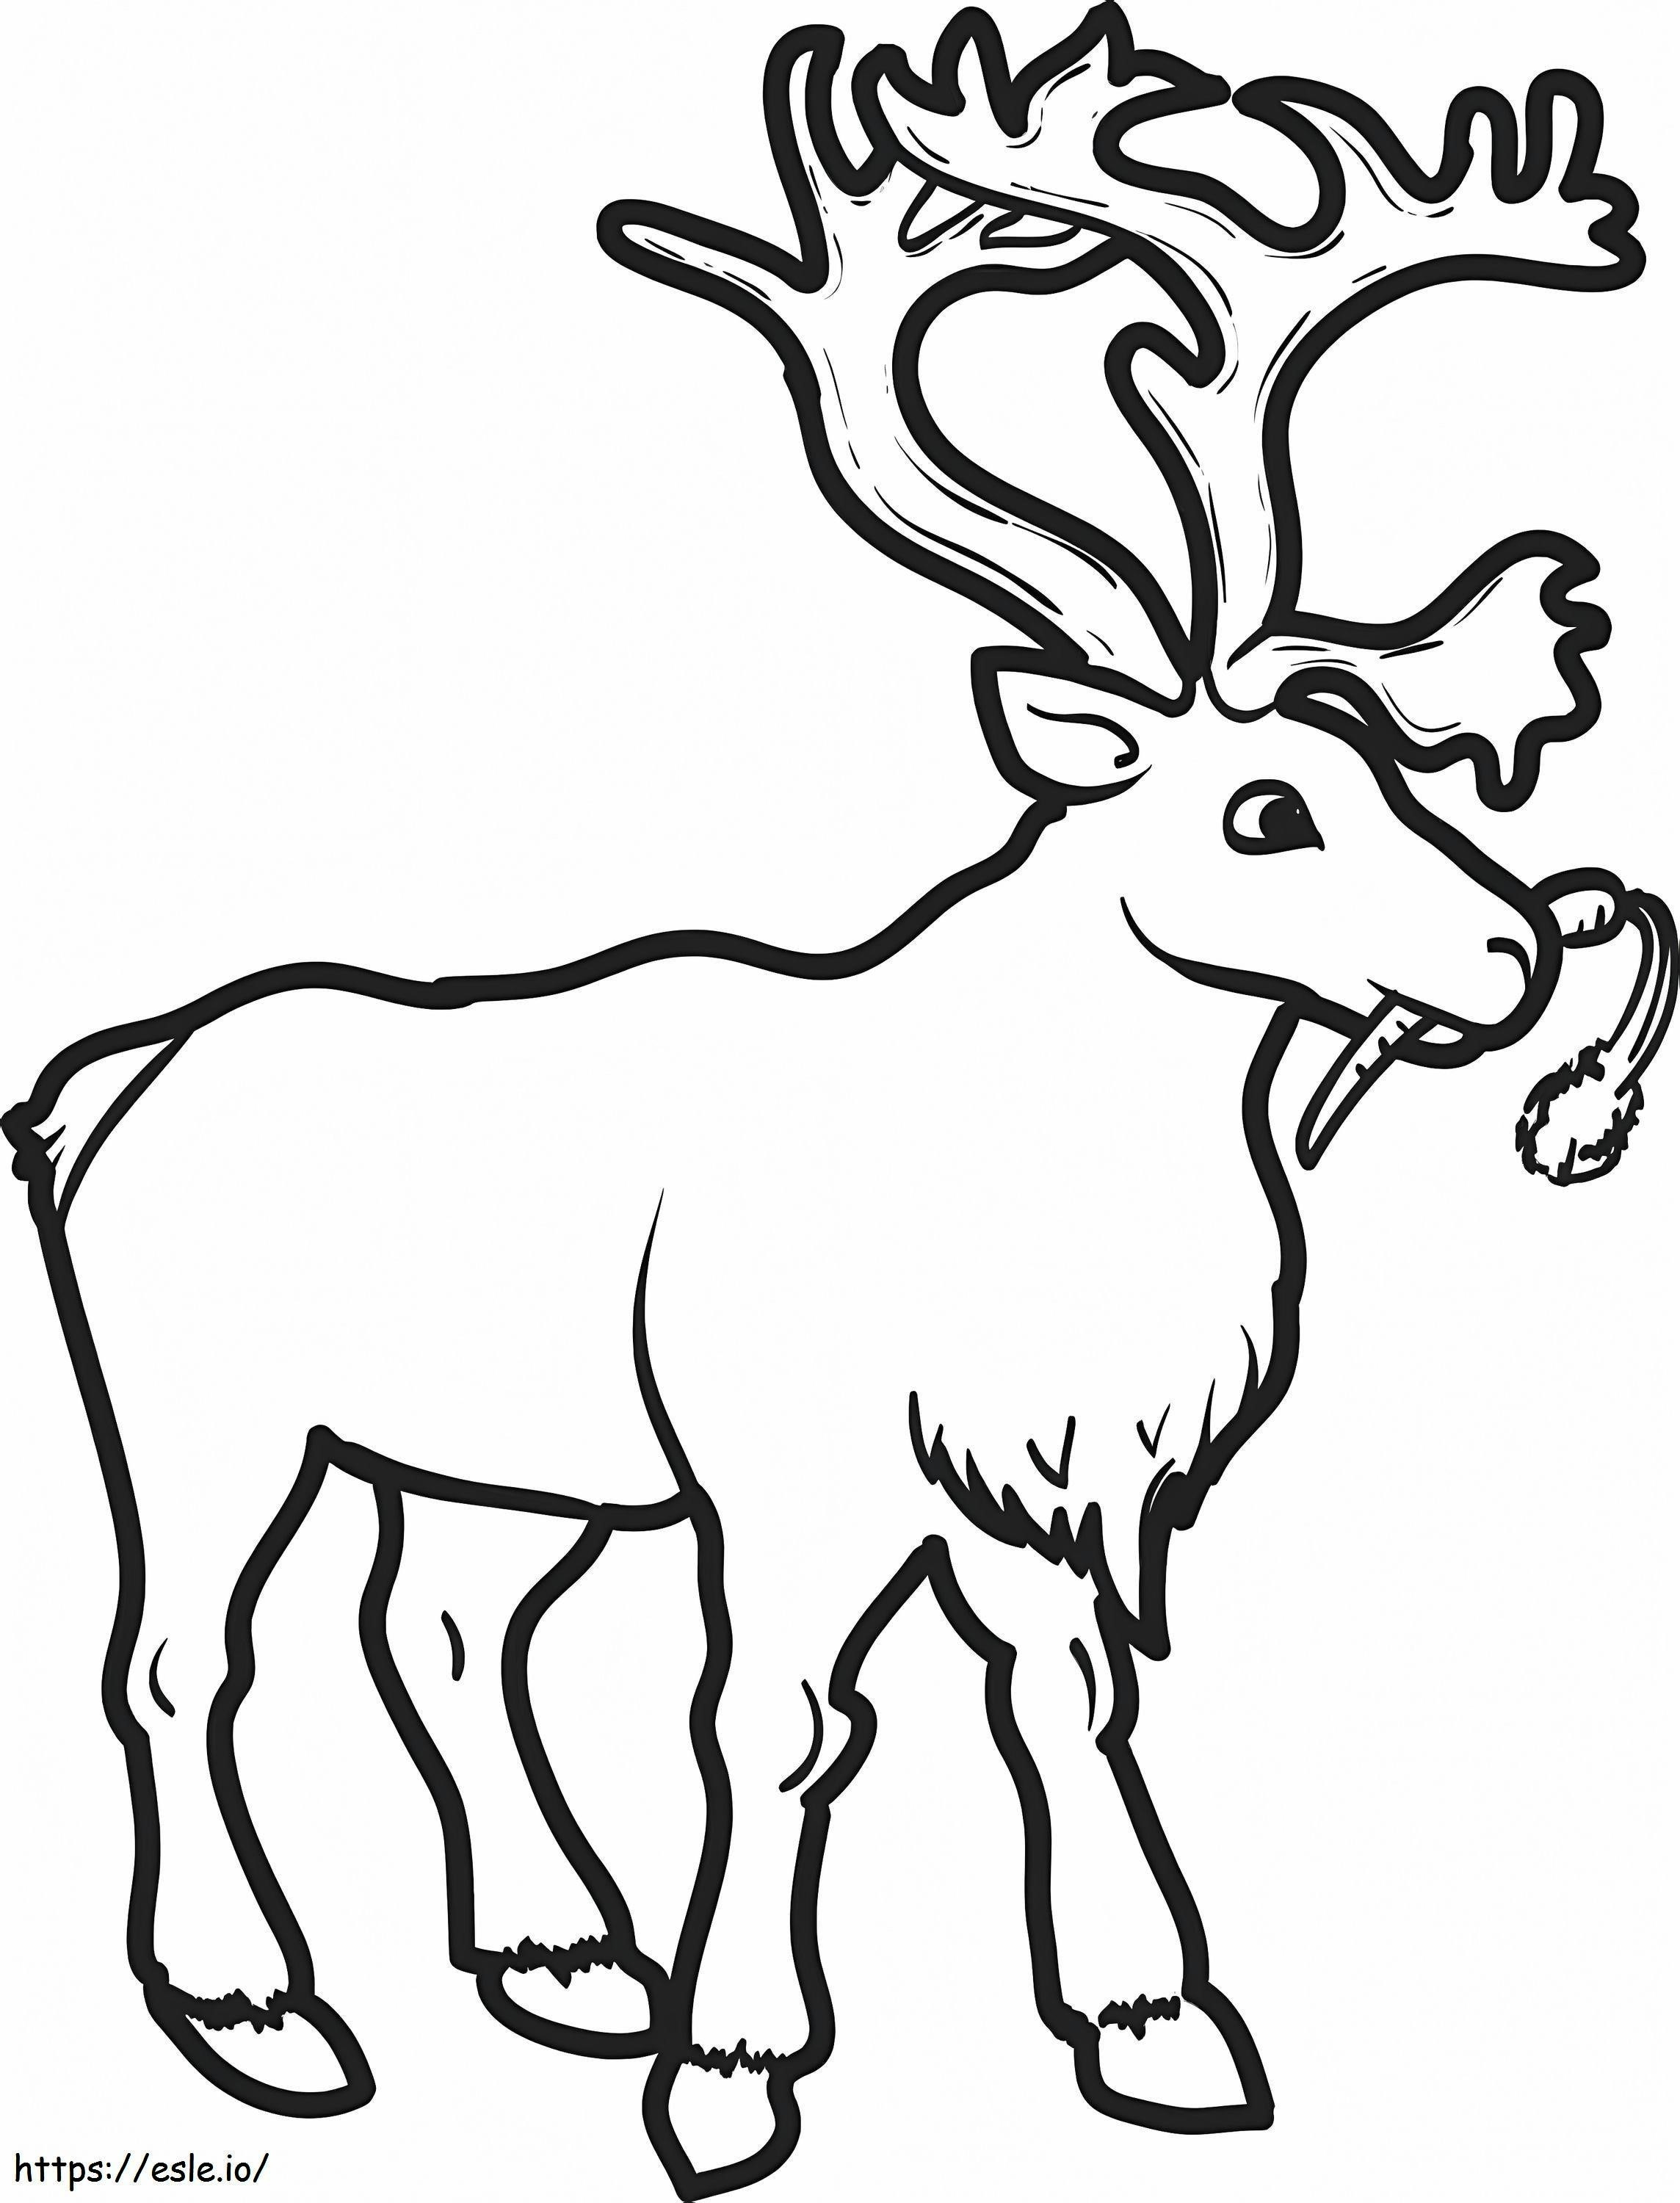 Reindeer With Carrot coloring page